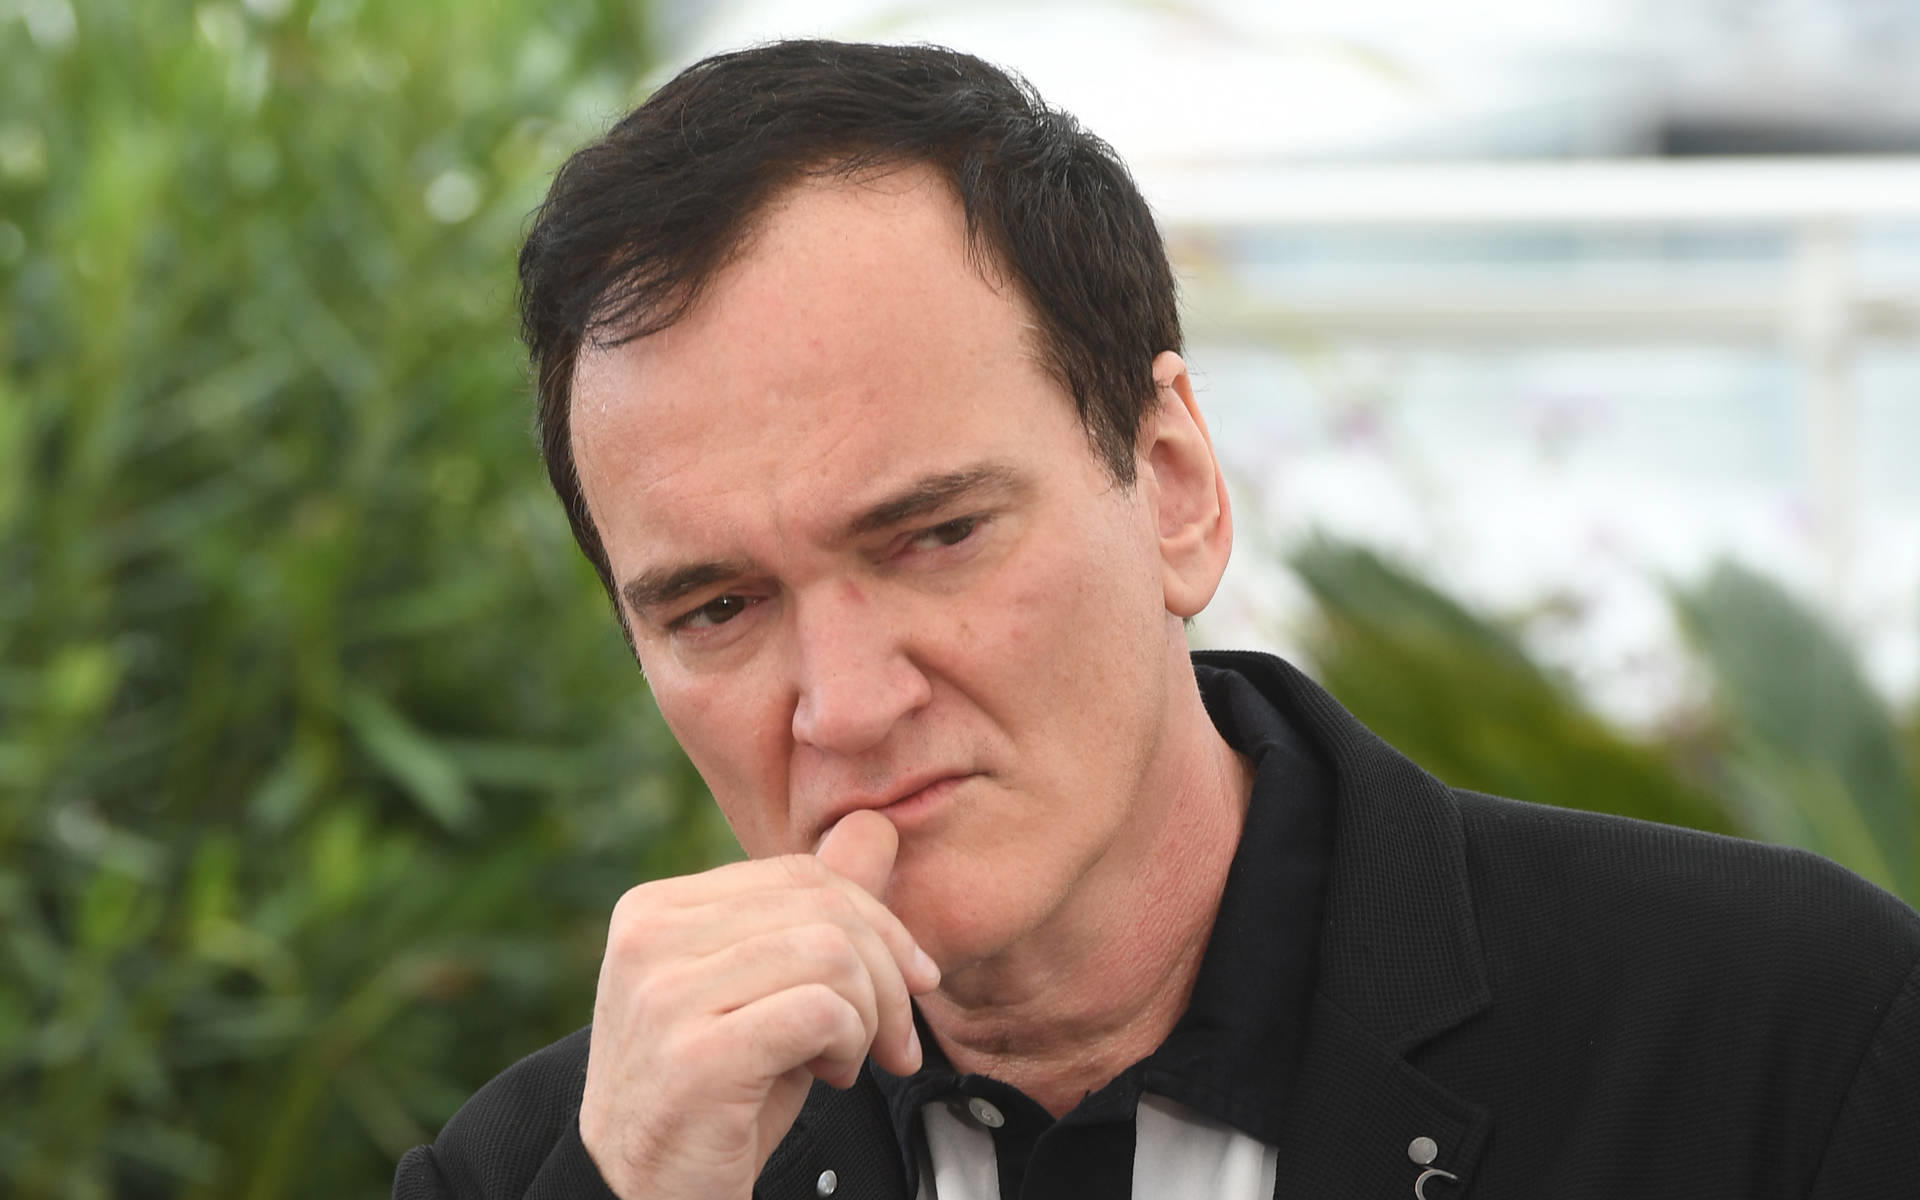 Quentin Tarantino: ‘Once Upon a Time in Hollywood’-Ableger als TV-Serie?